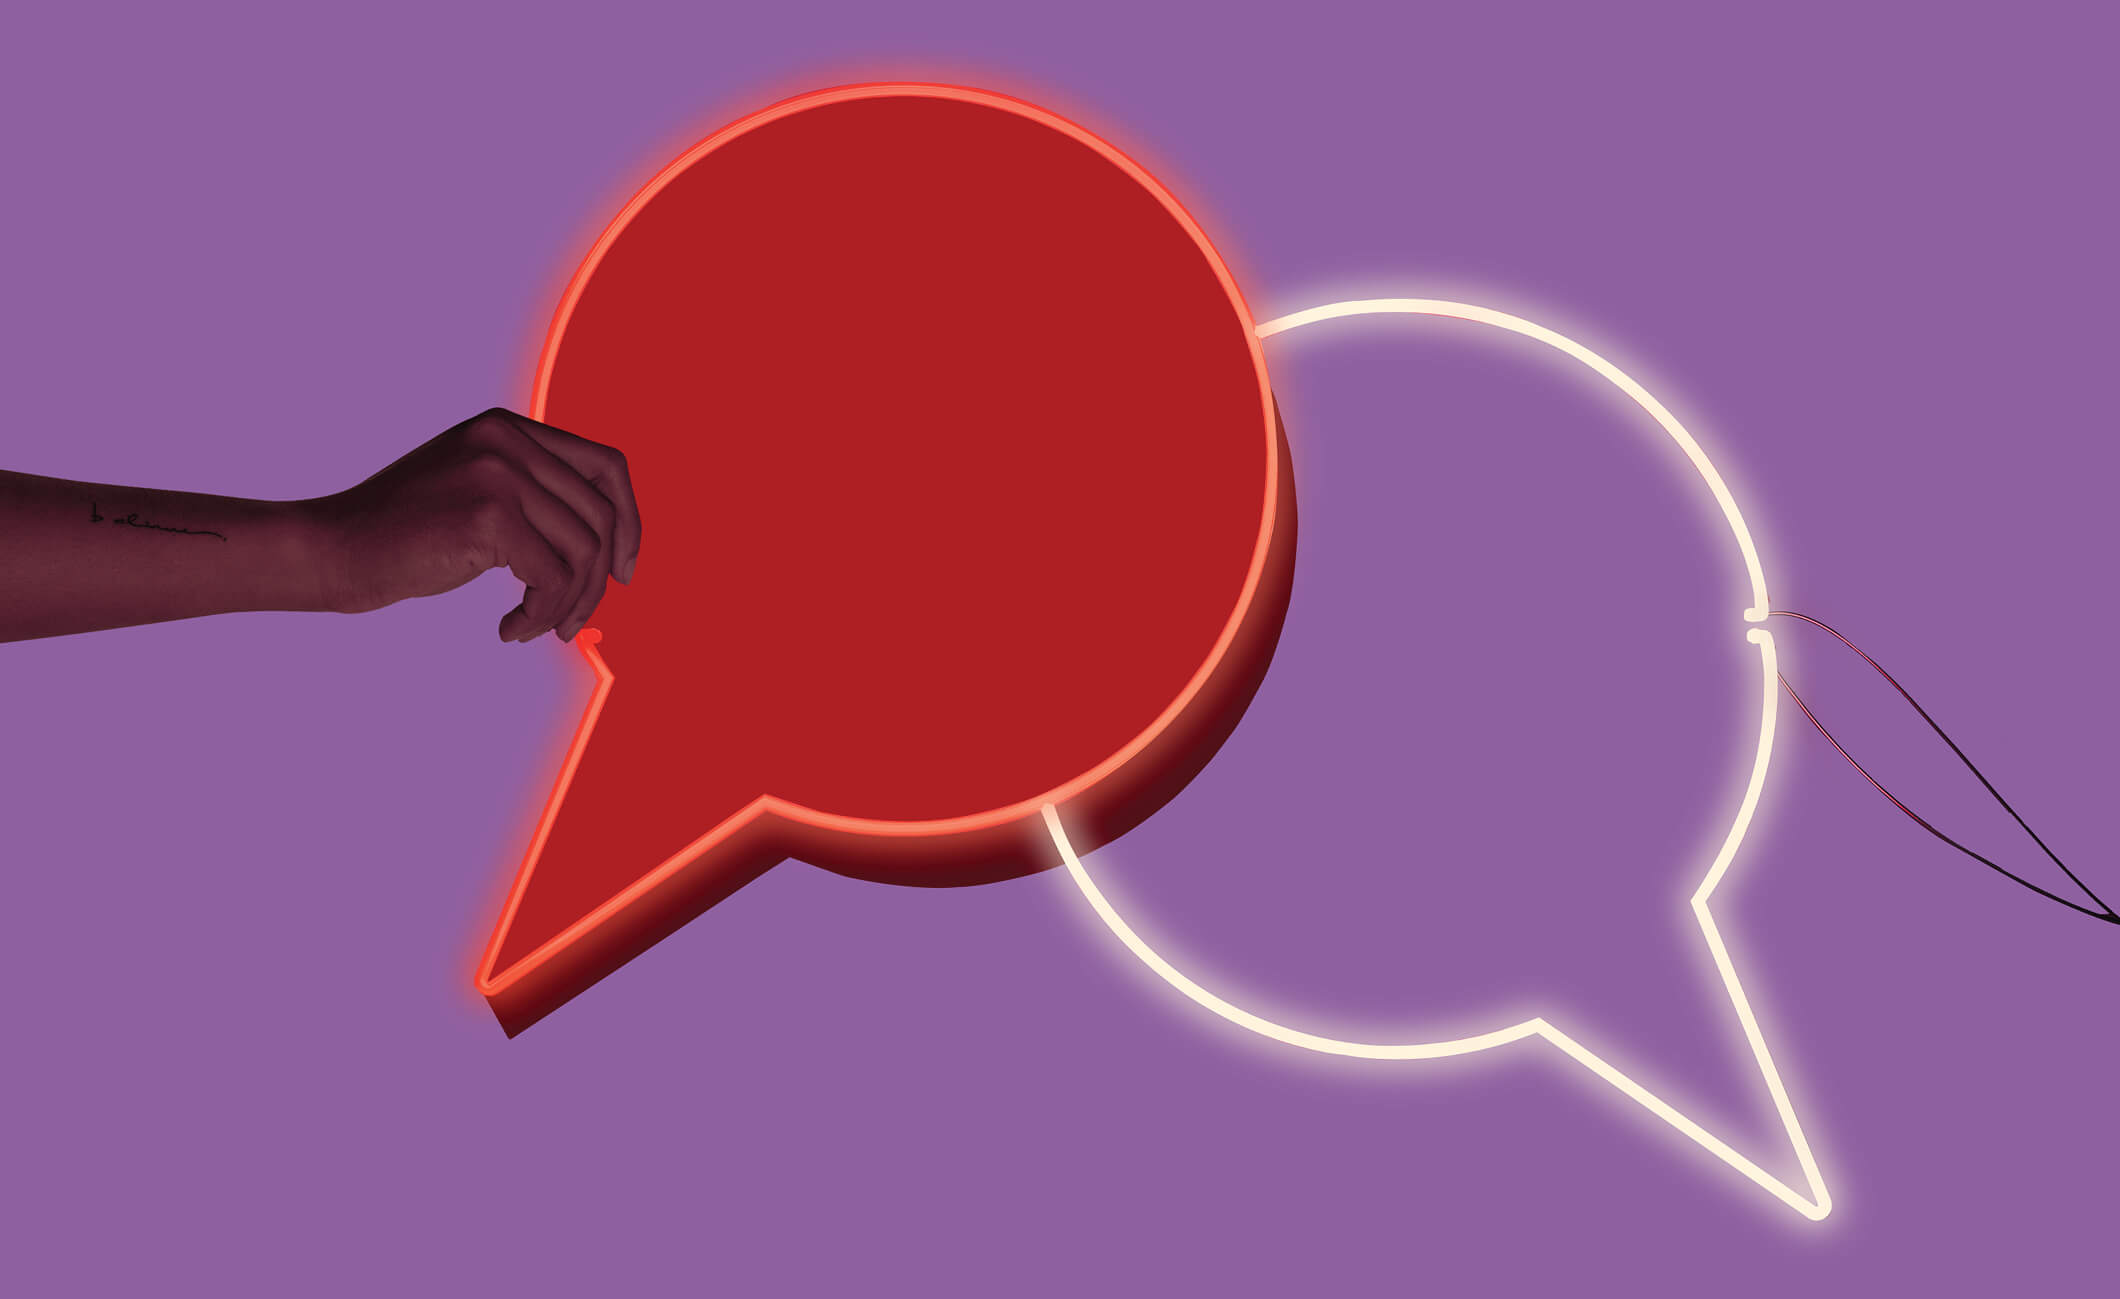 Speech bubbles overlapping on a purple background